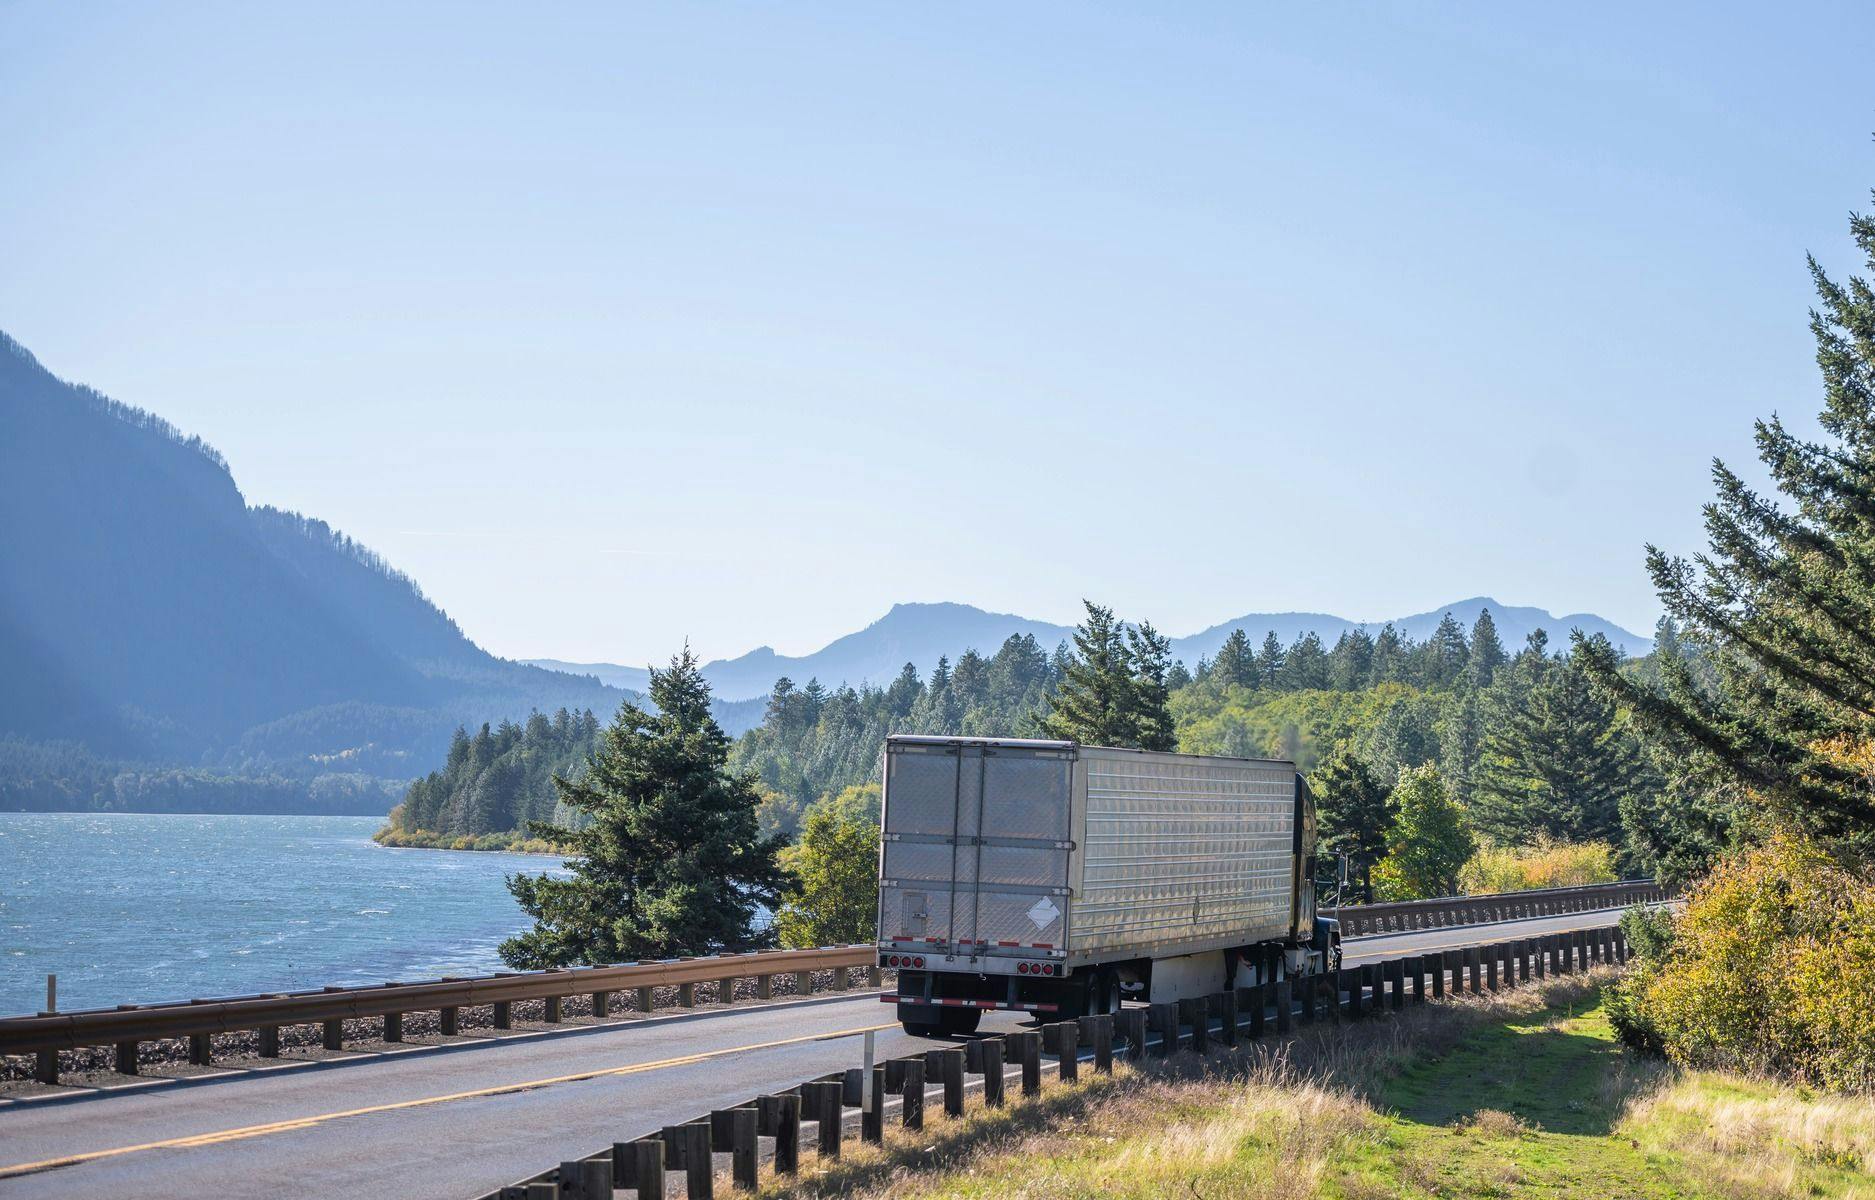 Serious About Reducing Your Transportation Emissions? Ask Yourself These 3 Critical Questions